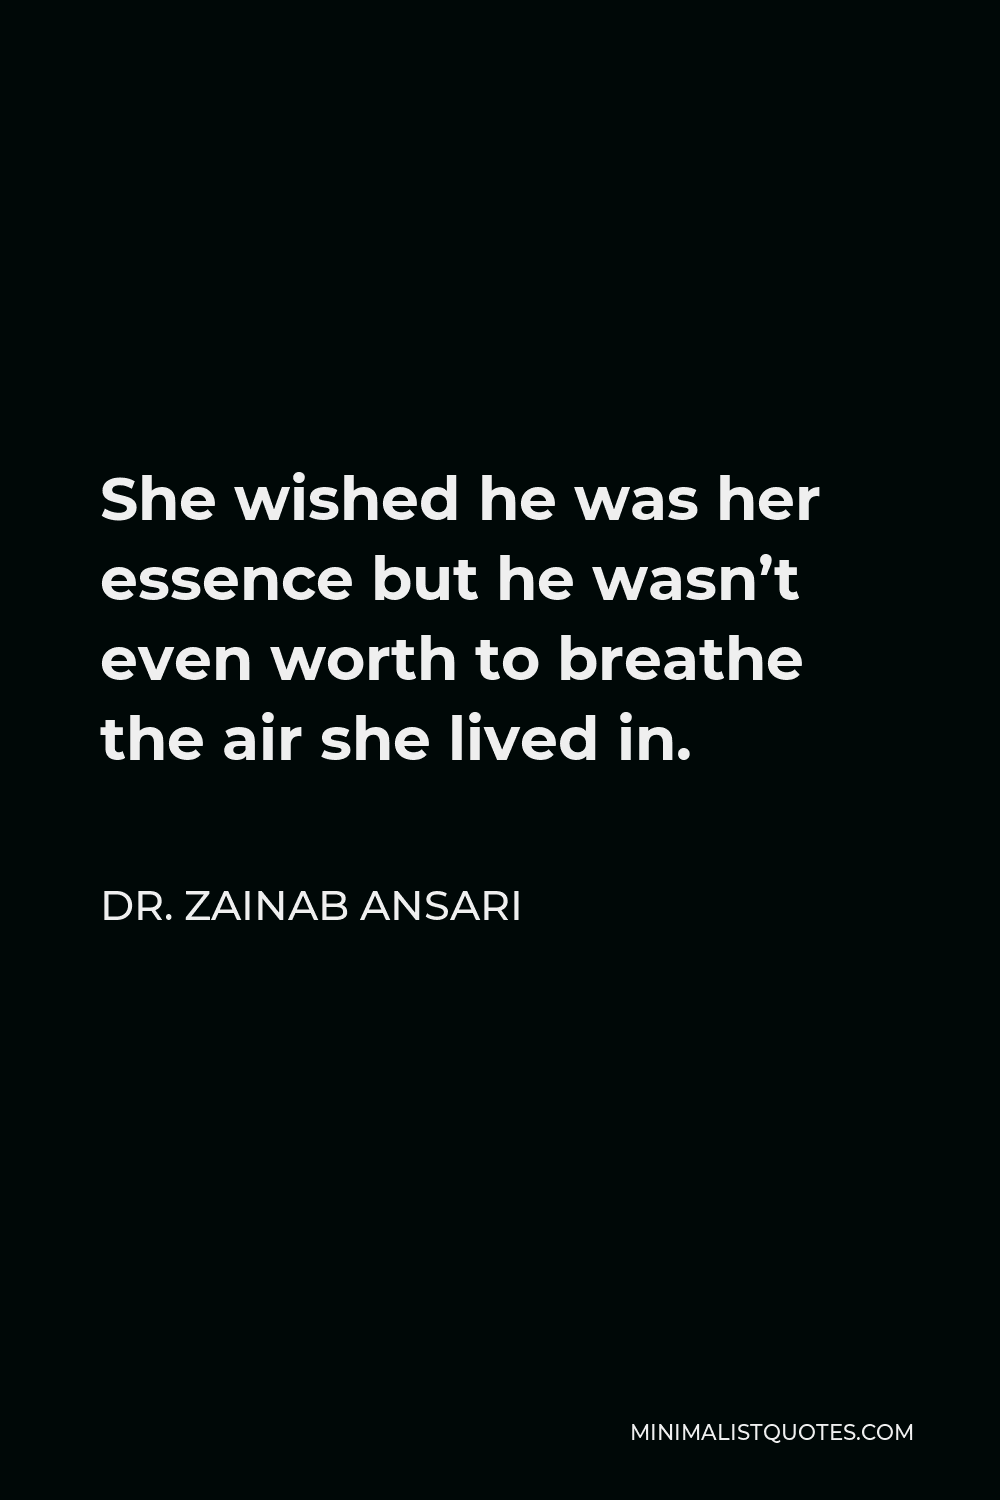 Dr. Zainab Ansari Quote - She wished he was her essence but he wasn’t even worth to breathe the air she lived in.